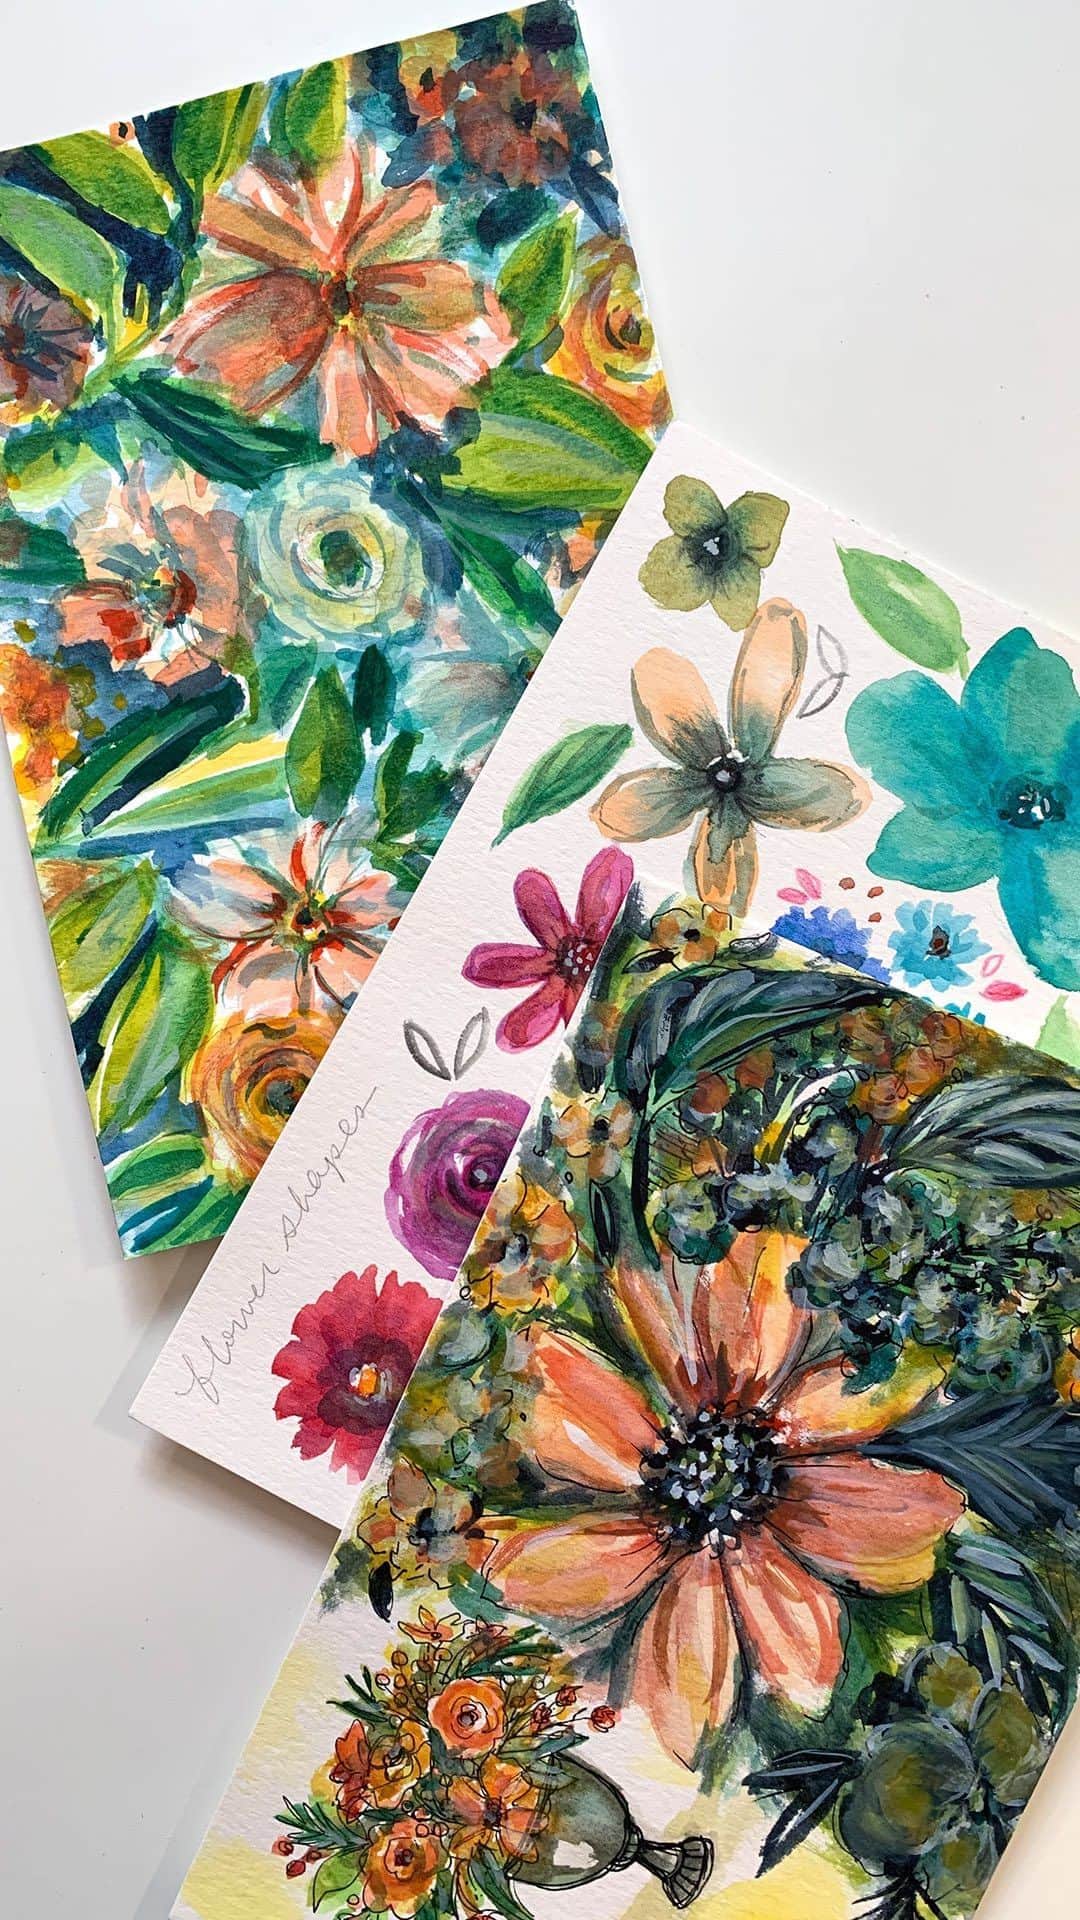 Sakura of America（サクラクレパス）のインスタグラム：「Hi it’s Jeanetta of @nettdesigns again sharing the floral lesson I taught my retreat students recently using the Koi Water Color kit.   First I shared with them the floral examples I made using the watercolor kit to use as inspiration.  I then taught how to paint leaves and how to add more depth to the green by adding blues. Adding blues makes the color richer. You can mix it on the palette or add it to the green after you paint it and blend it in using your brush.  I explained how to leave negative space if you want something white. You don’t really paint white in watercolor so plan ahead and leave the parts of the page white that you want to be white. You can also add color and details to that section later after the surrounding areas dry.  I also showed them how to use a wet on wet technique to add color into the center of flowers. Dab a color into wet paint in the center to make dots that bleed beautifully!   What a joy it was to teach these techniques. The students really loved painting using the Koi Water Color kit and picked up the lessons so easily. They made the most gorgeous florals - aren’t they great?! And in general they painted a LOT of art using the kit. I was so impressed. I even joined them with a floral piece of my own!」